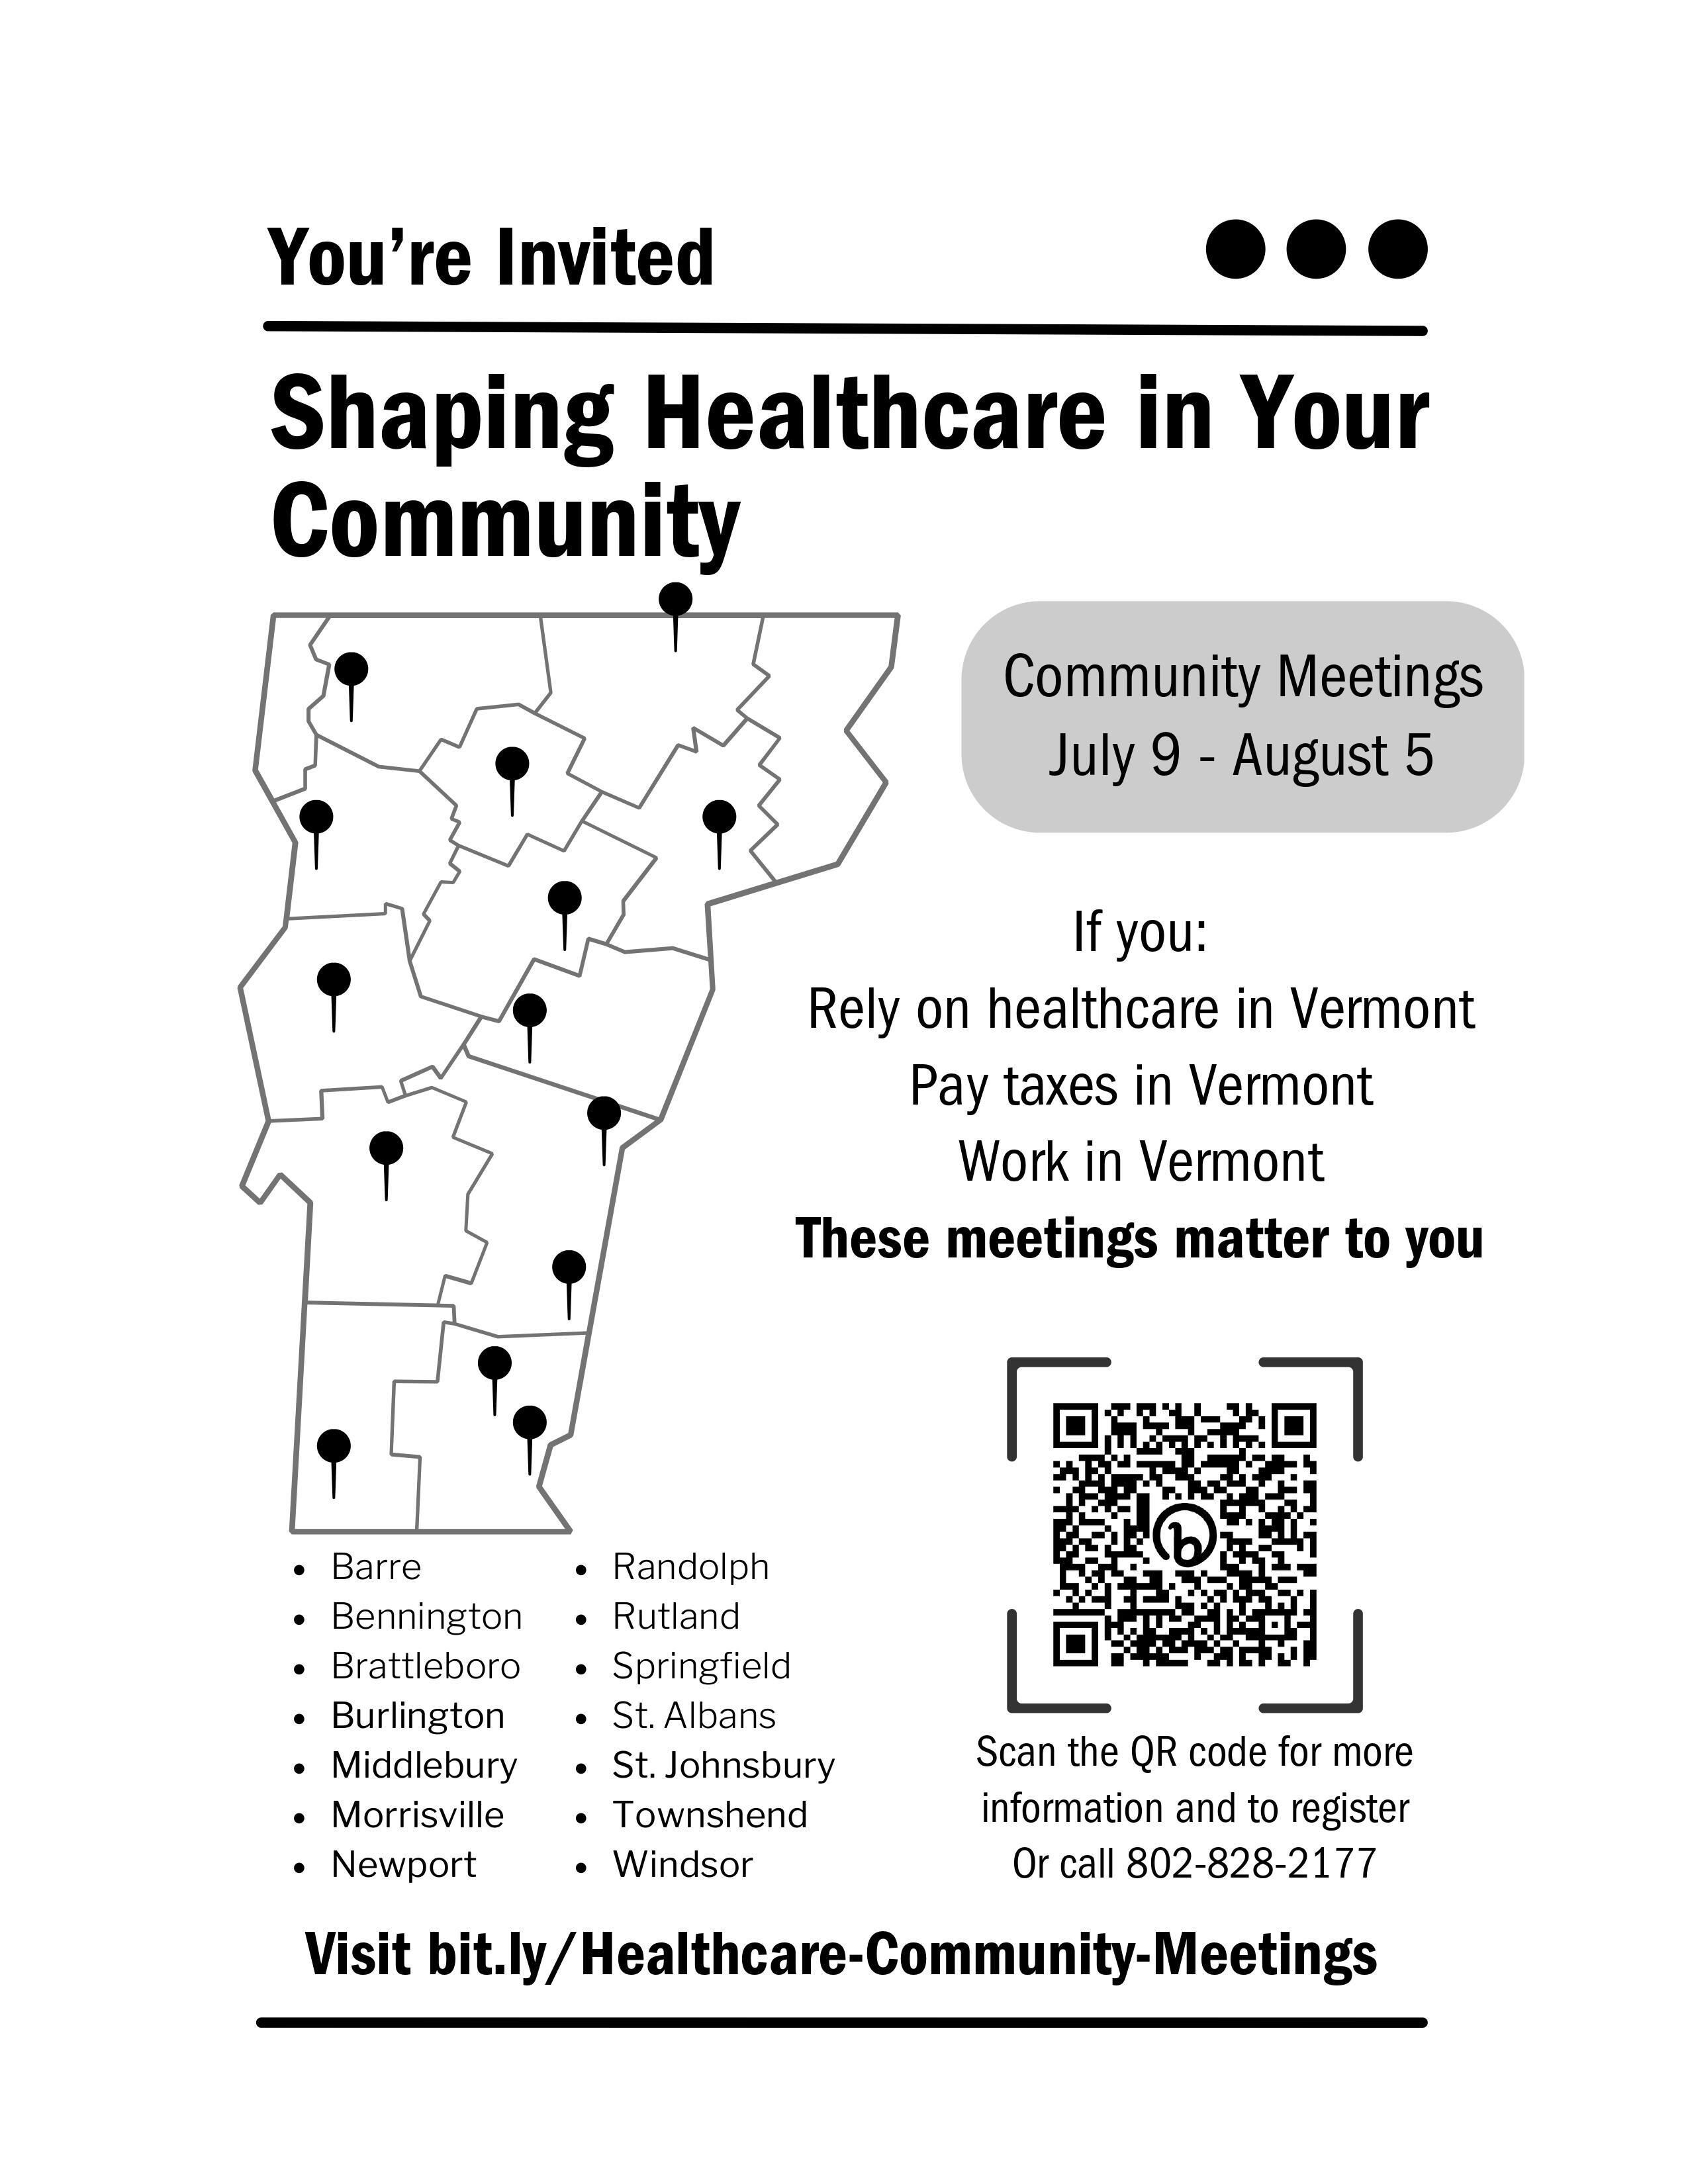 Shaping Healthcare in Your Community